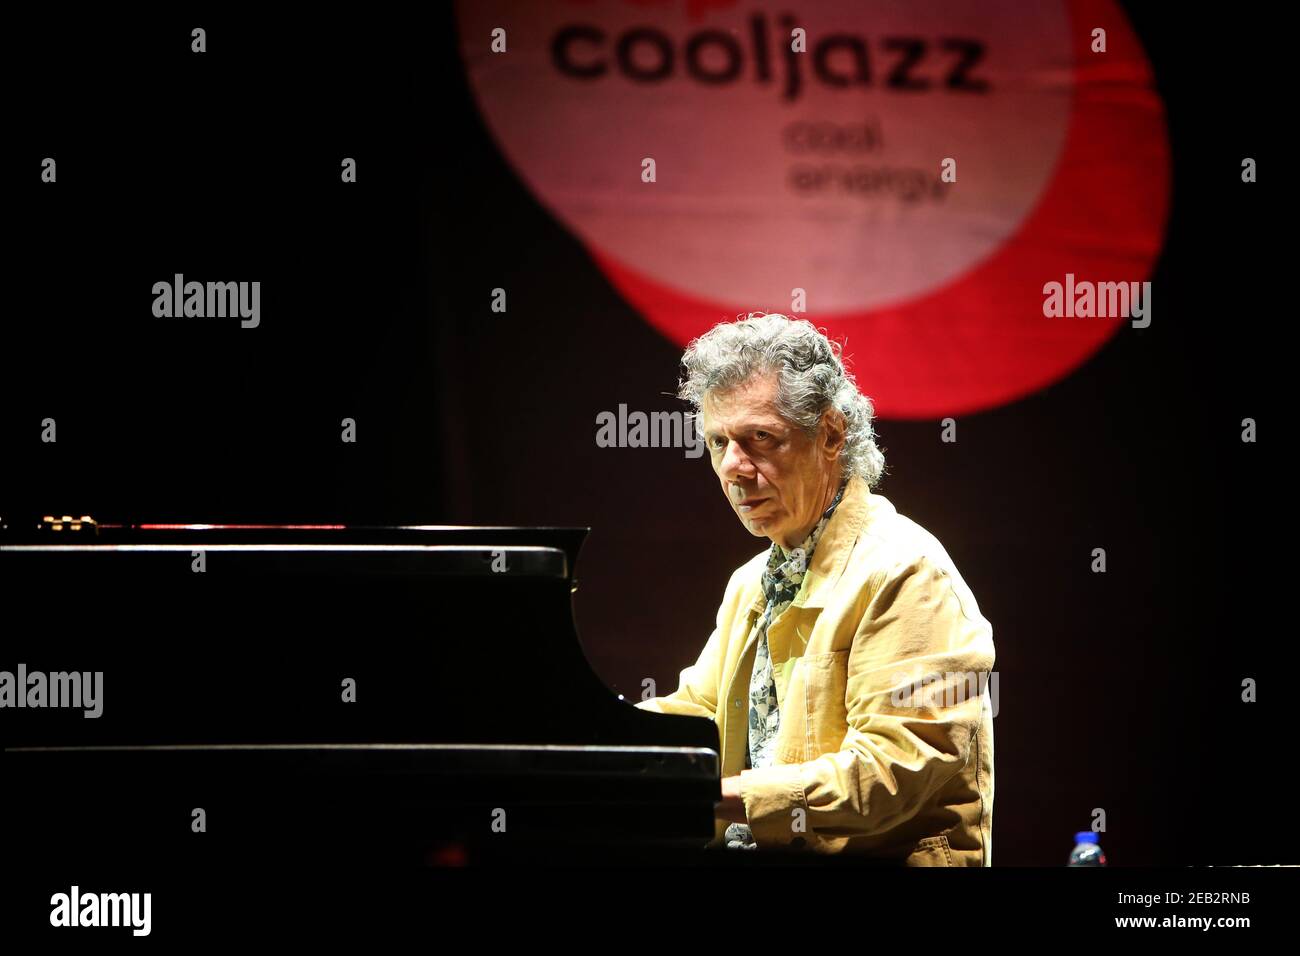 New York, USA. 11th Feb, 2021. FILE IMAGE: US jazz pianist Chick Corea performs at the EDP Cool Jazz Festival in Oeiras, Portugal on July 19, 2015. Corea, a towering jazz pianist with a staggering 23 Grammy awards who pushed the boundaries of the genre and worked alongside Miles Davis and Herbie Hancock, has died. He was 79. Corea died Tuesday, Feb. 9, 2021, of a rare form of cancer, his team posted on his web site. His death was confirmed by Corea's web and marketing manager, Dan Muse. Credit: Pedro Fiuza/ZUMA Wire/Alamy Live News Stock Photo